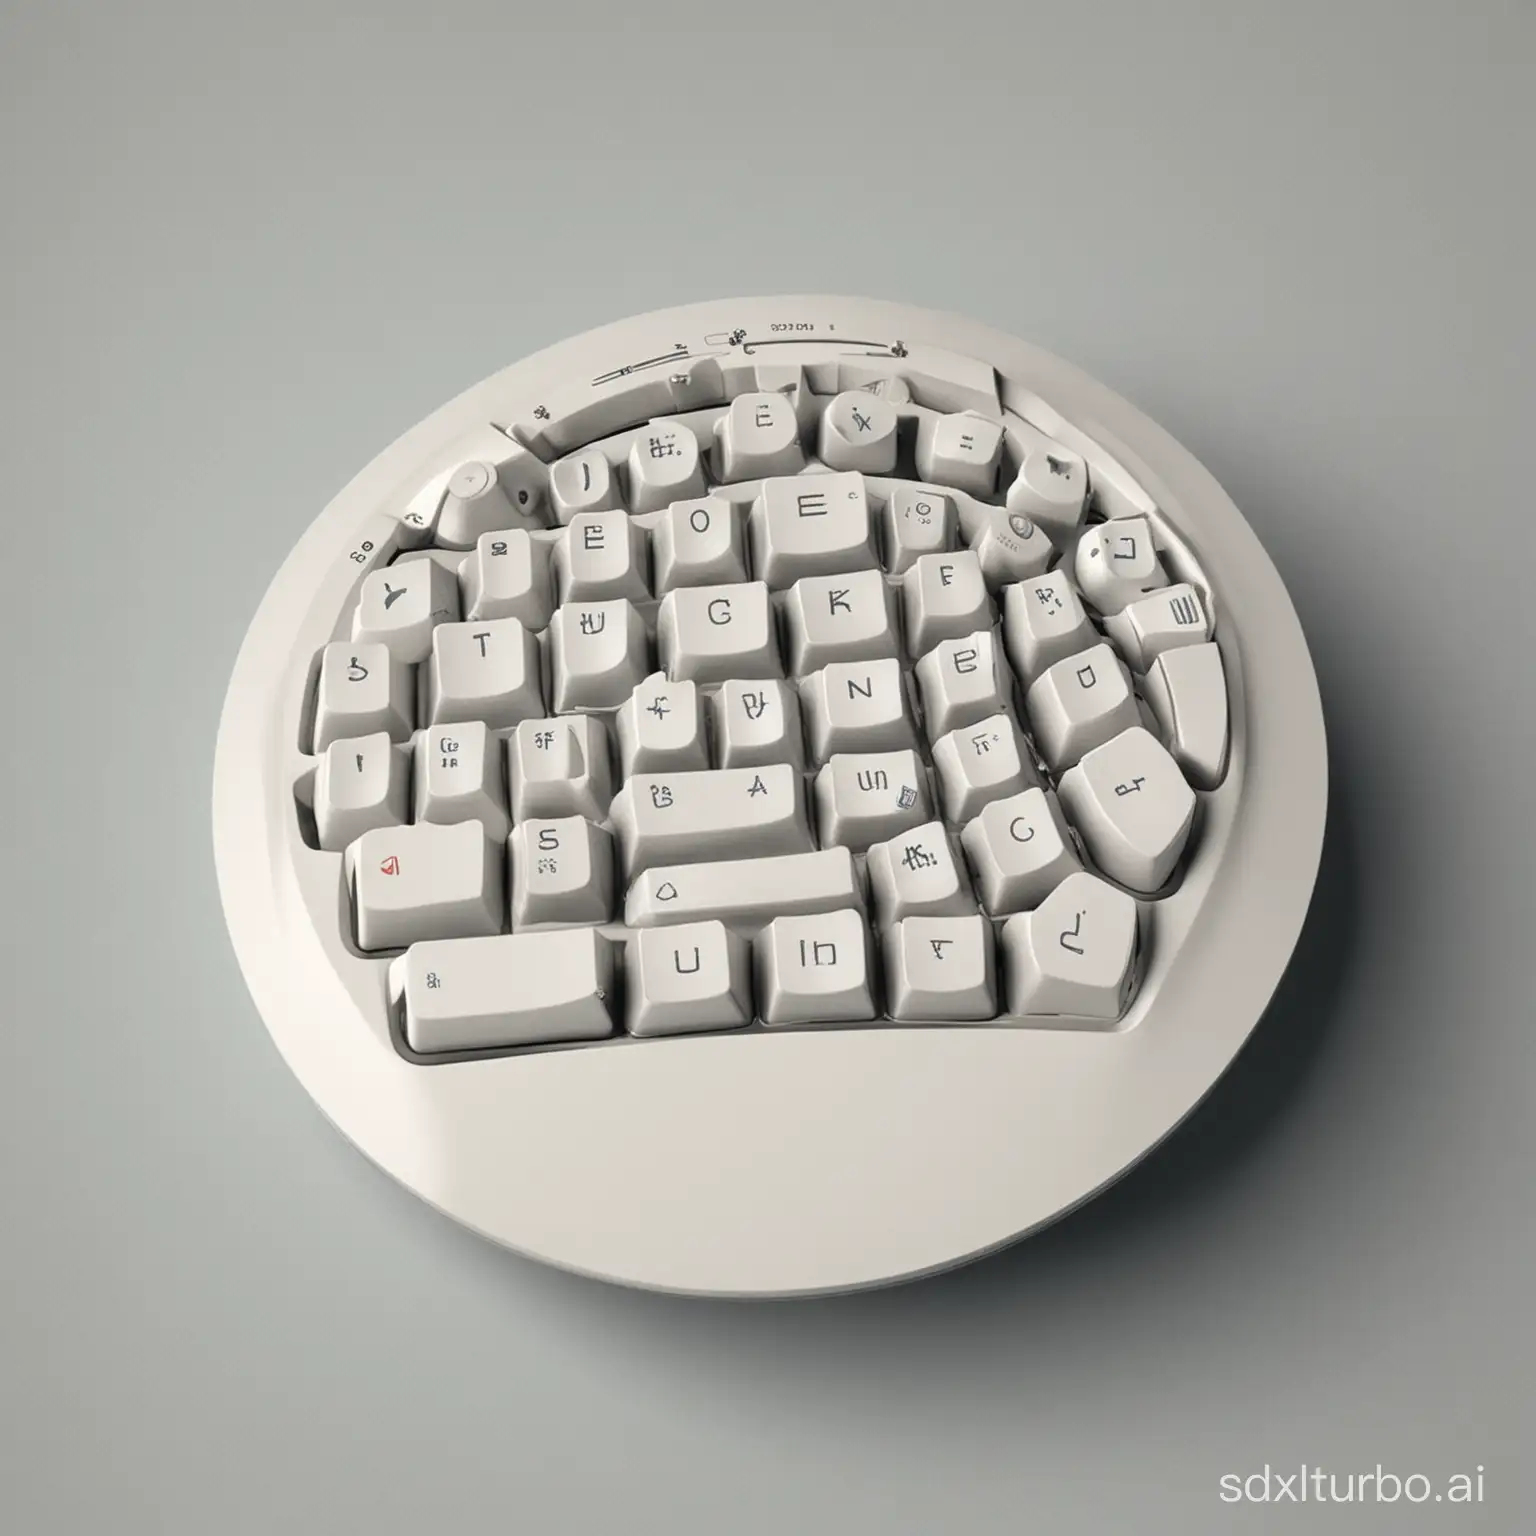 personal computer keyboard / disk-shaped base for one-handed input/
The base on which the buttons are placed is disc-shaped.